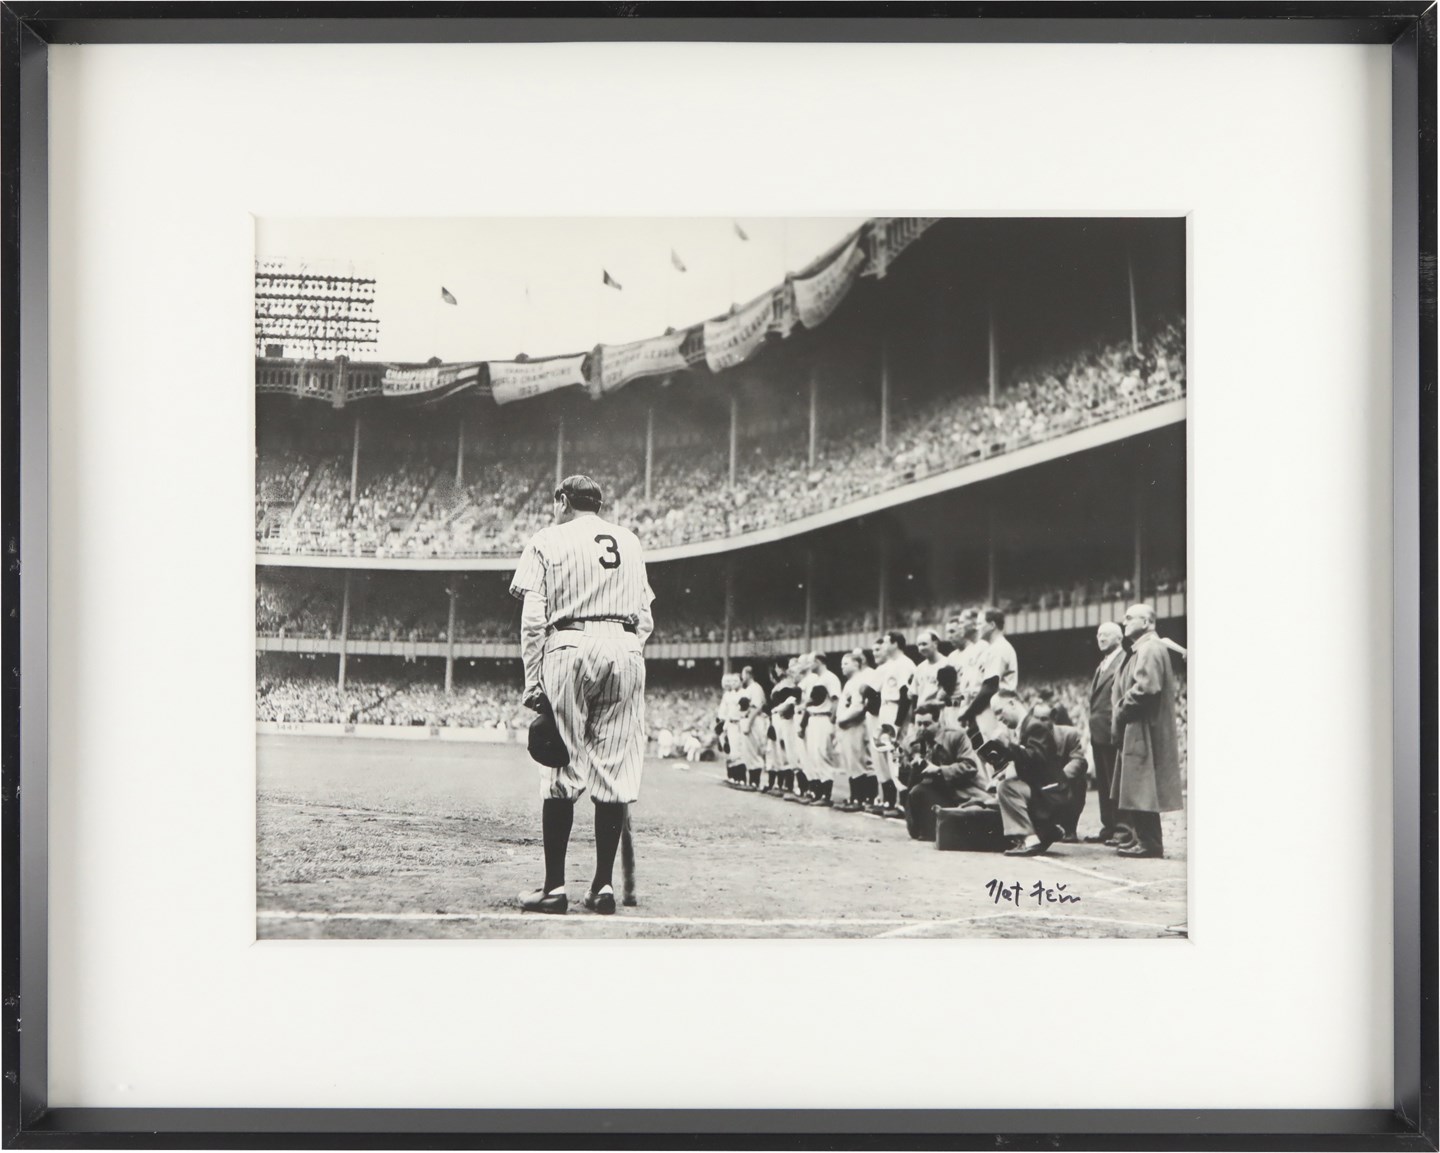 - "The Babe Bows Out" Large-Format Photograph Signed by Nat Fein